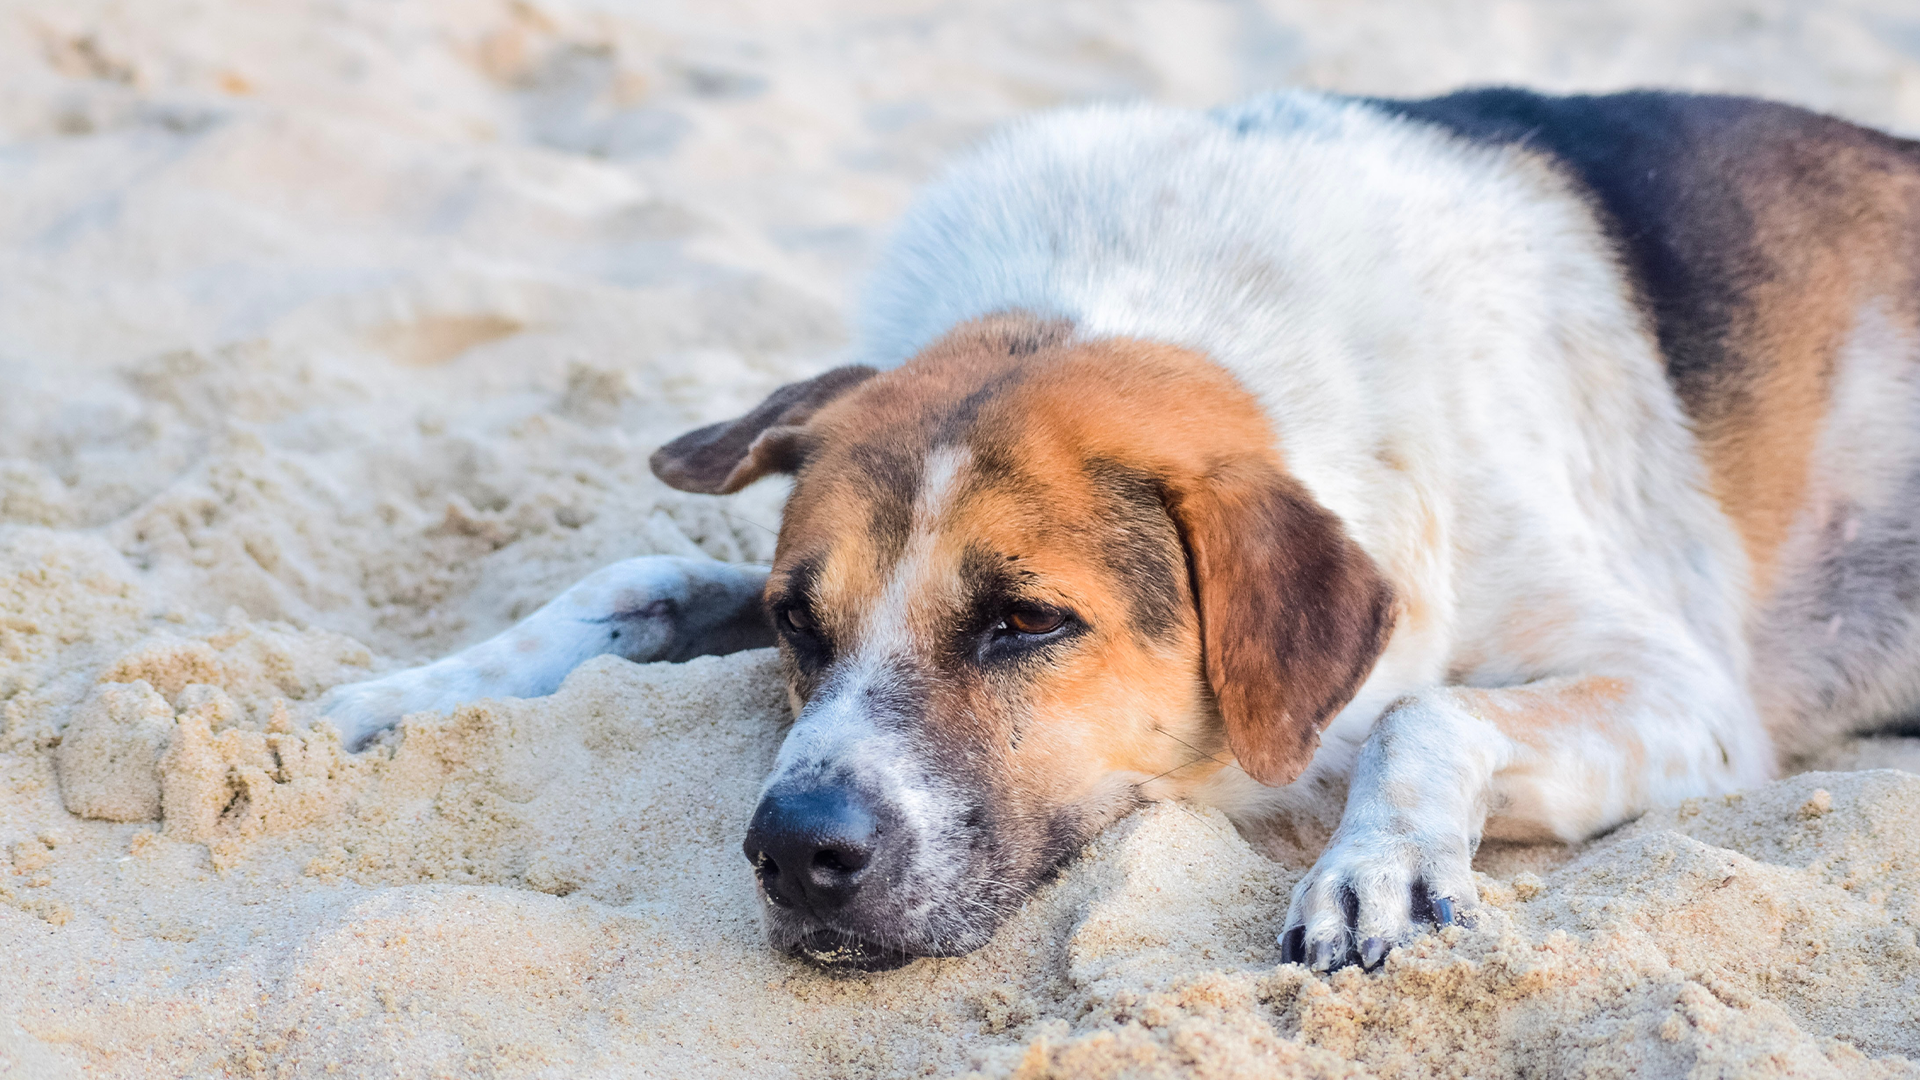 Heatstrokes are a very serious condition and can be fatal for dogs. Dogs are sensitive to heat in ways that humans aren't, so it's important to keep an eye on your dog when the weather starts getting hot this summer. If you see any of these symptoms, take